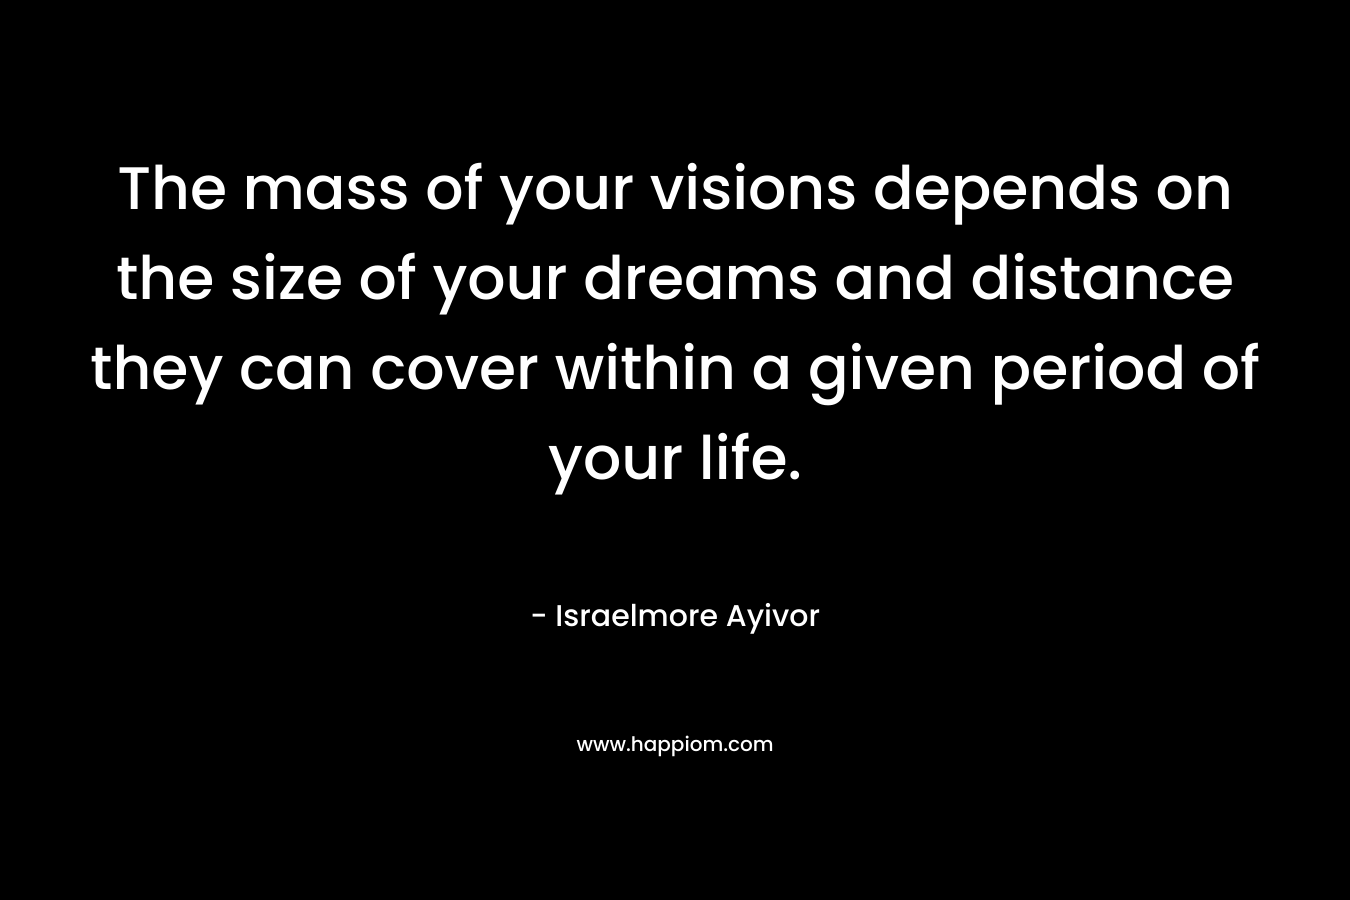 The mass of your visions depends on the size of your dreams and distance they can cover within a given period of your life.